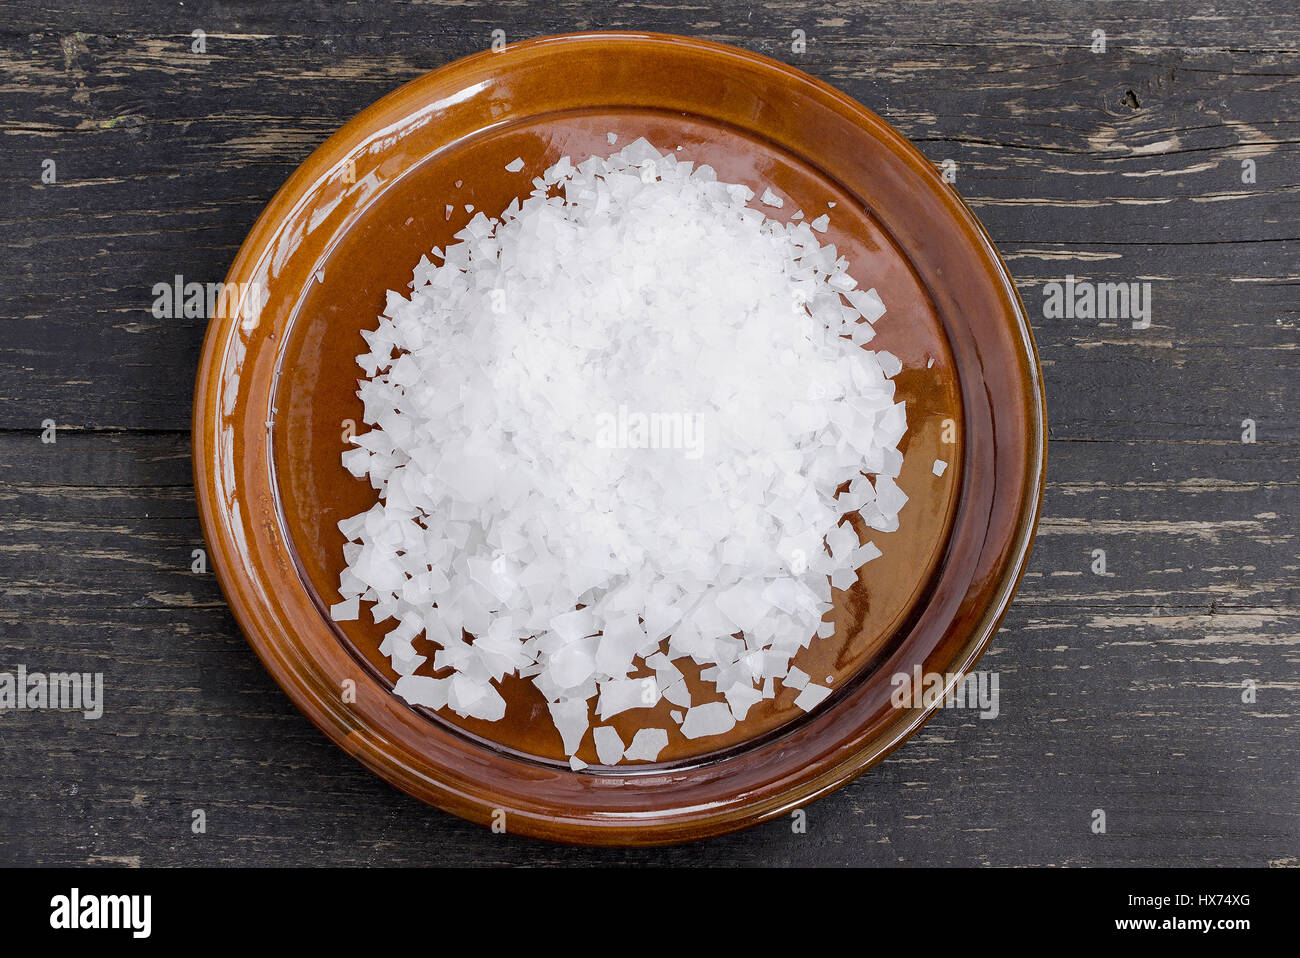 Magnesium chloride flakes, full saucer Stock Photo